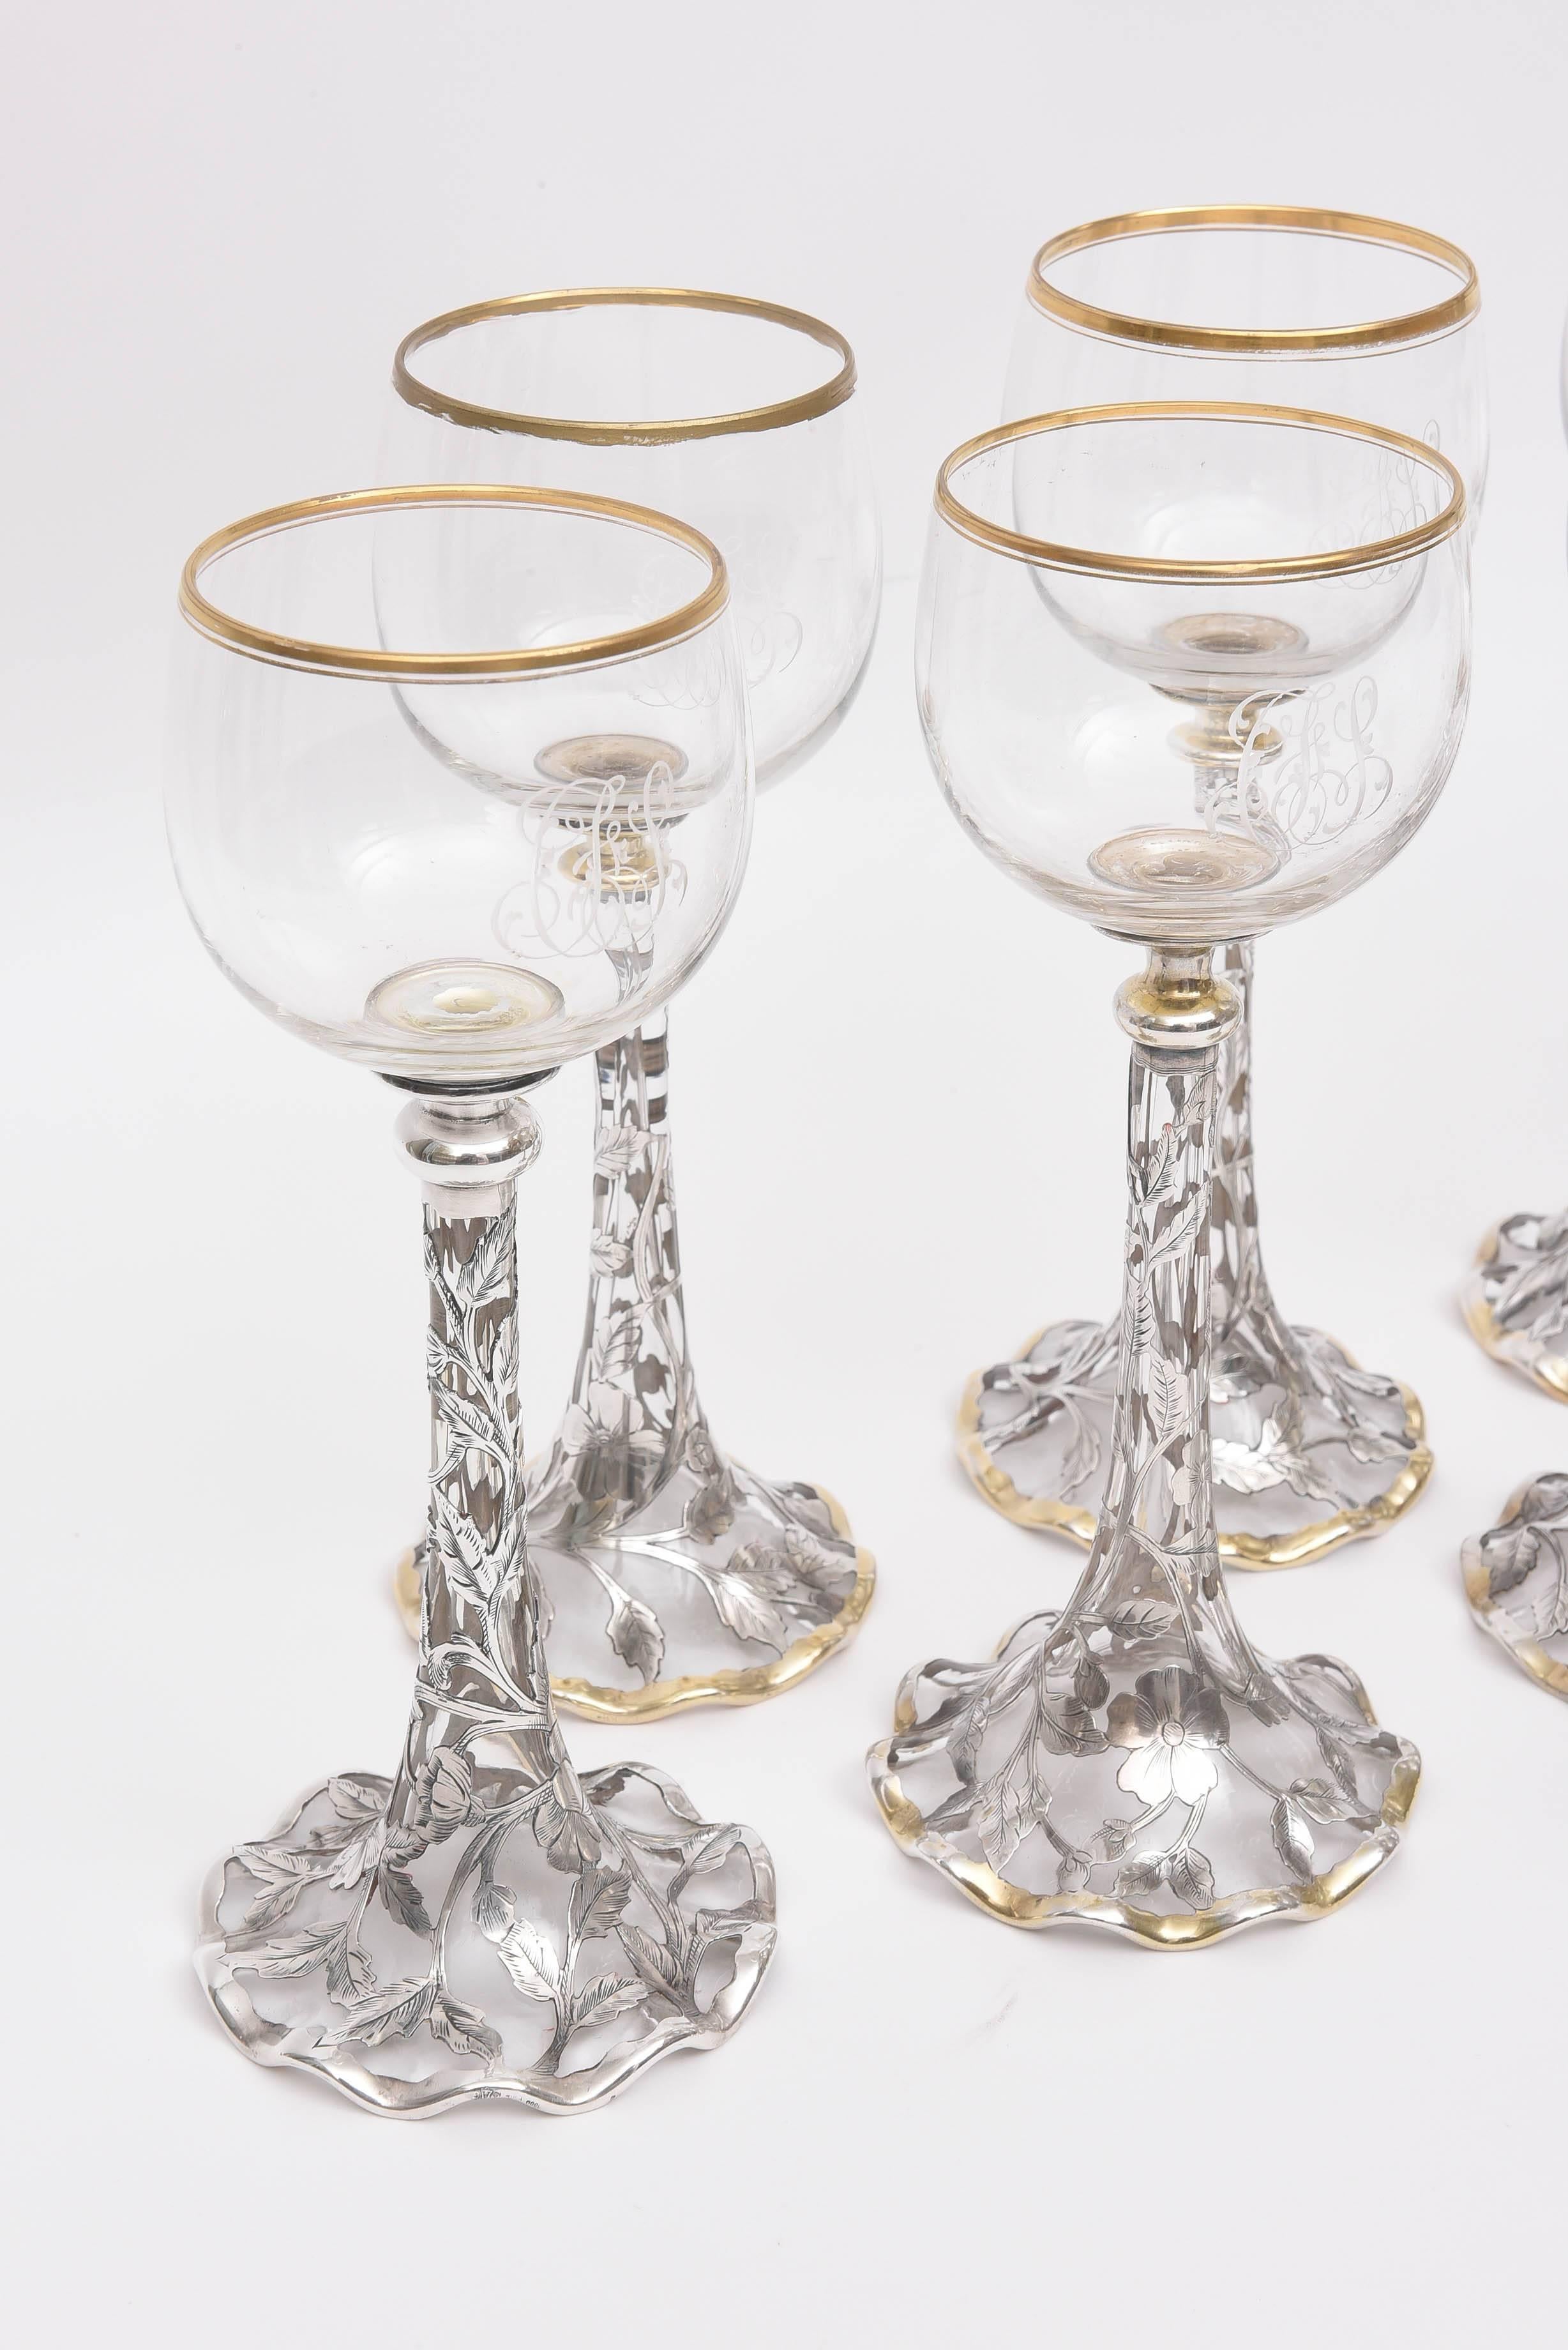 A delightful and elegant set of wine goblets featuring blown crystal bowls and an intricate sterling overlay design by Gorham. Hallmarked. Trumpet shaped stem with a very pretty ruffled base. Trimmed in 24-karat gold. An unique set of and